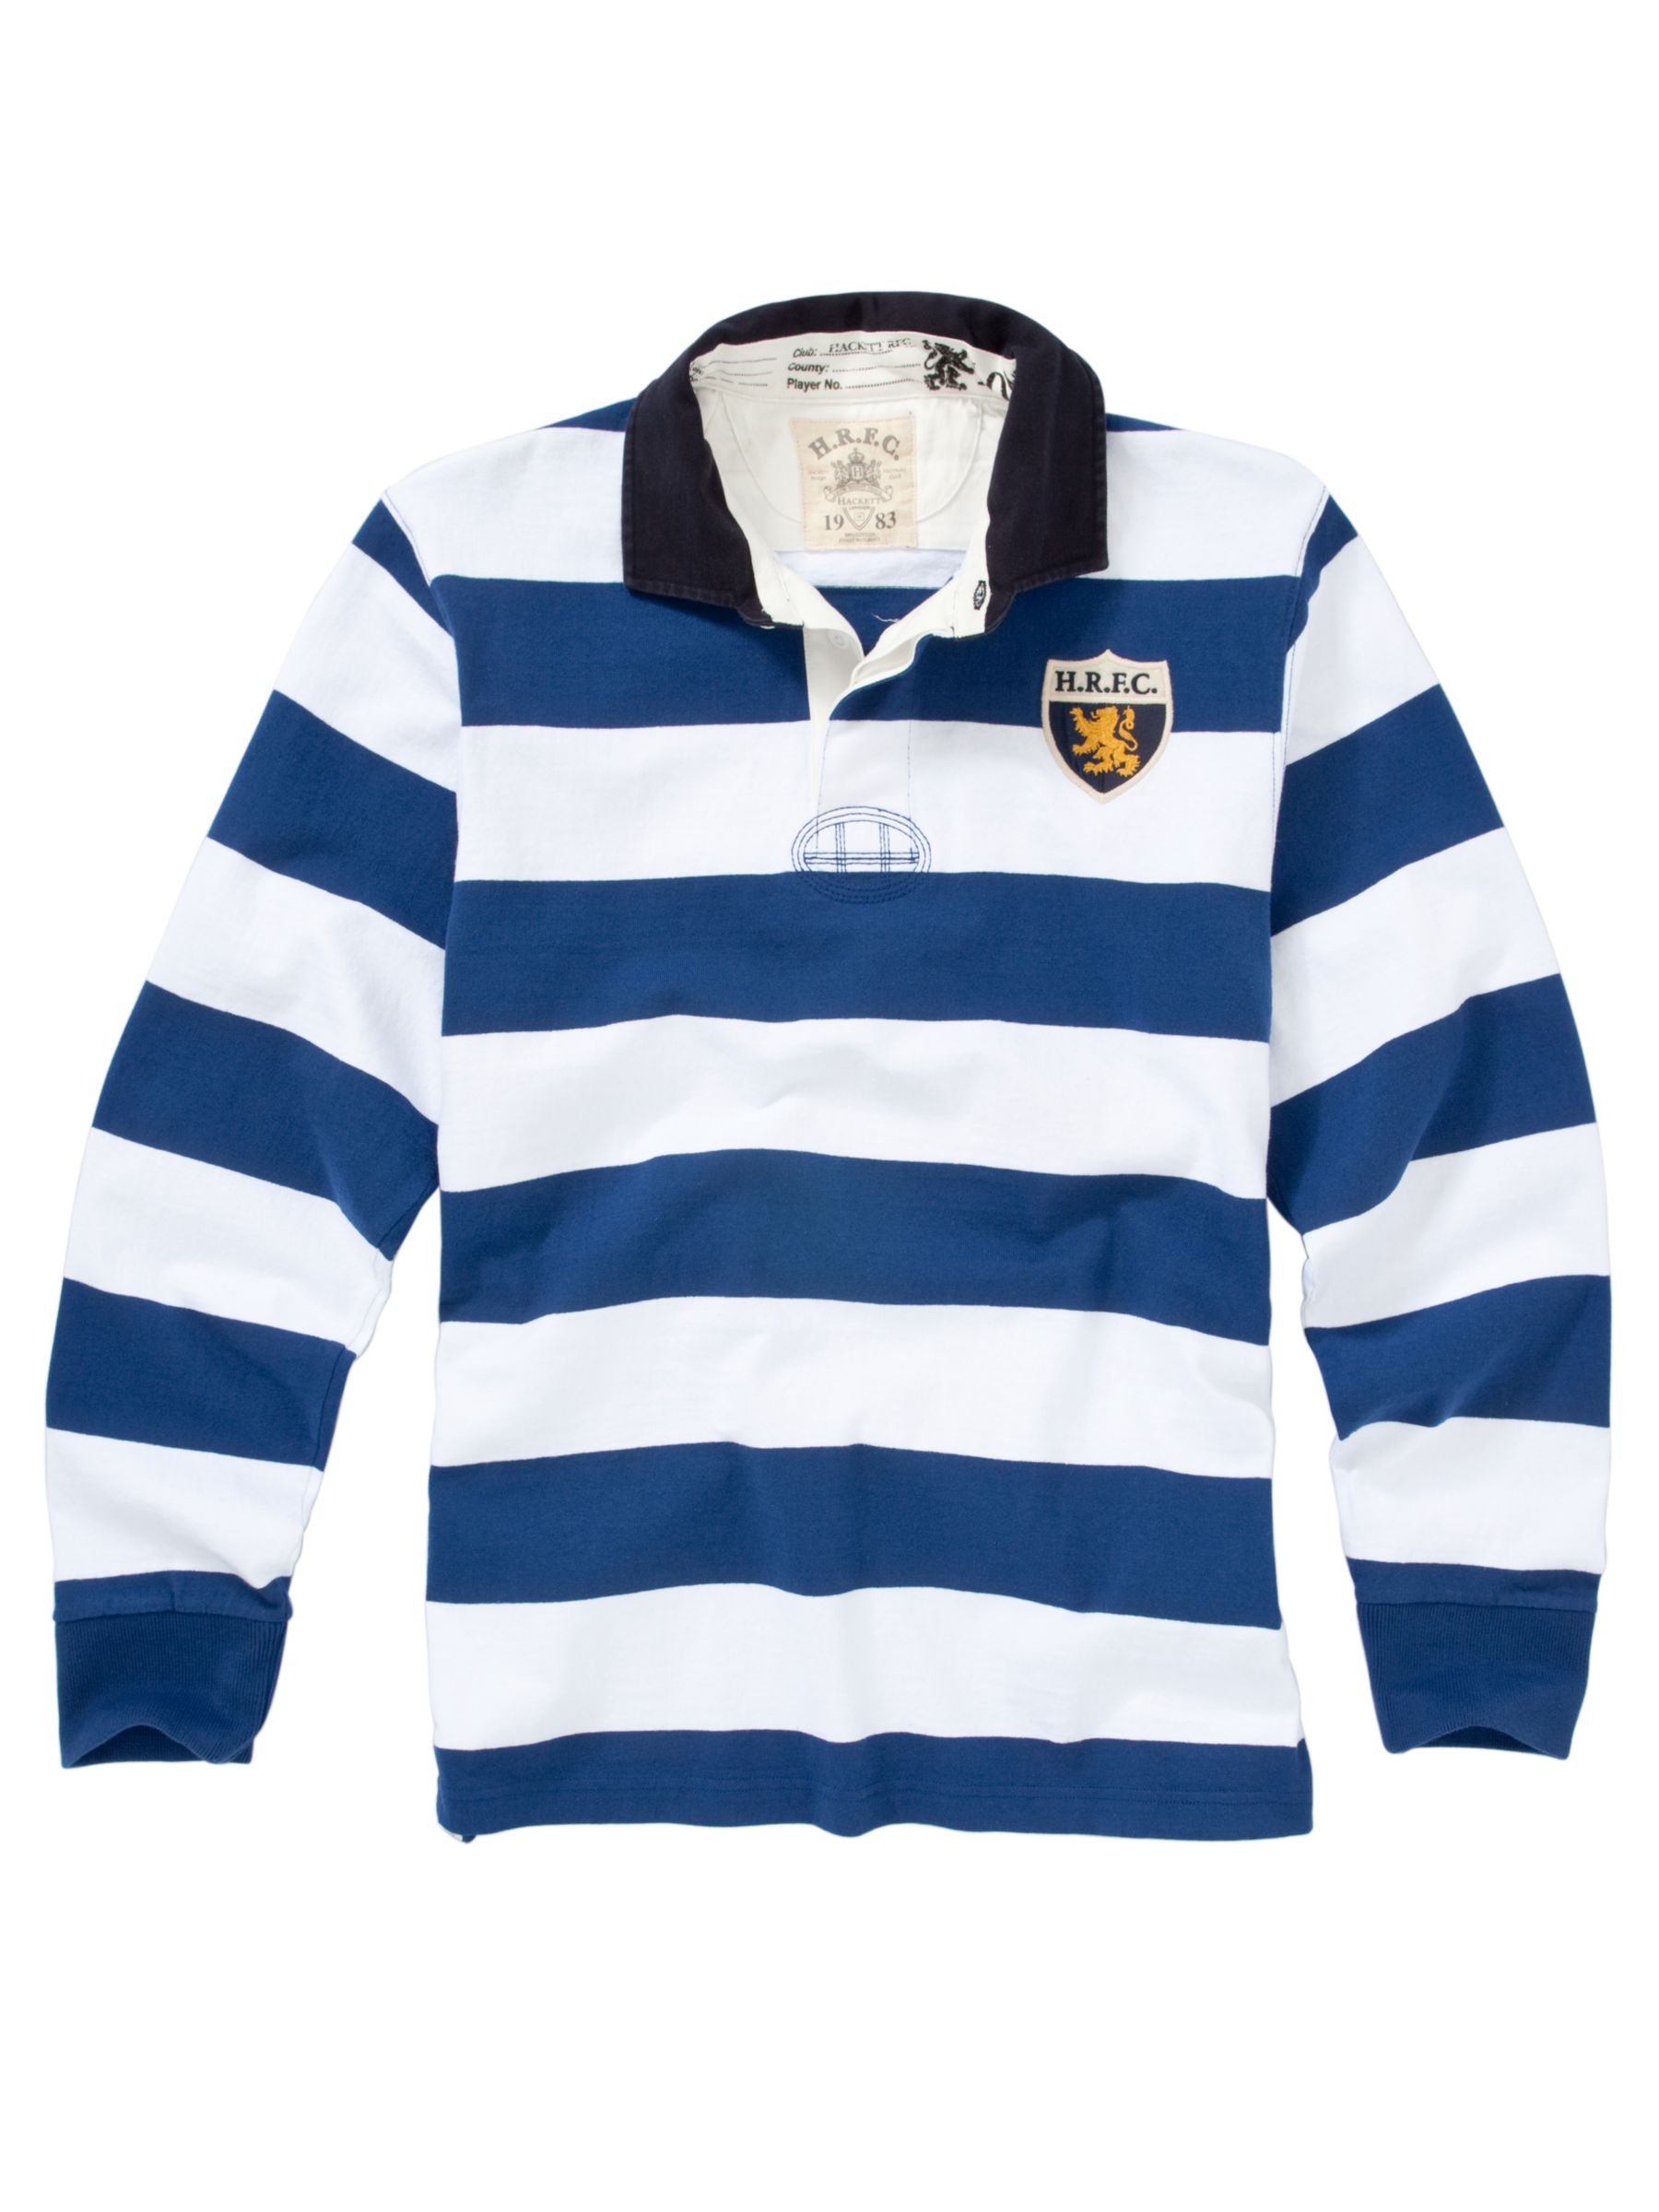 Vintage Patch Rugby Shirt,